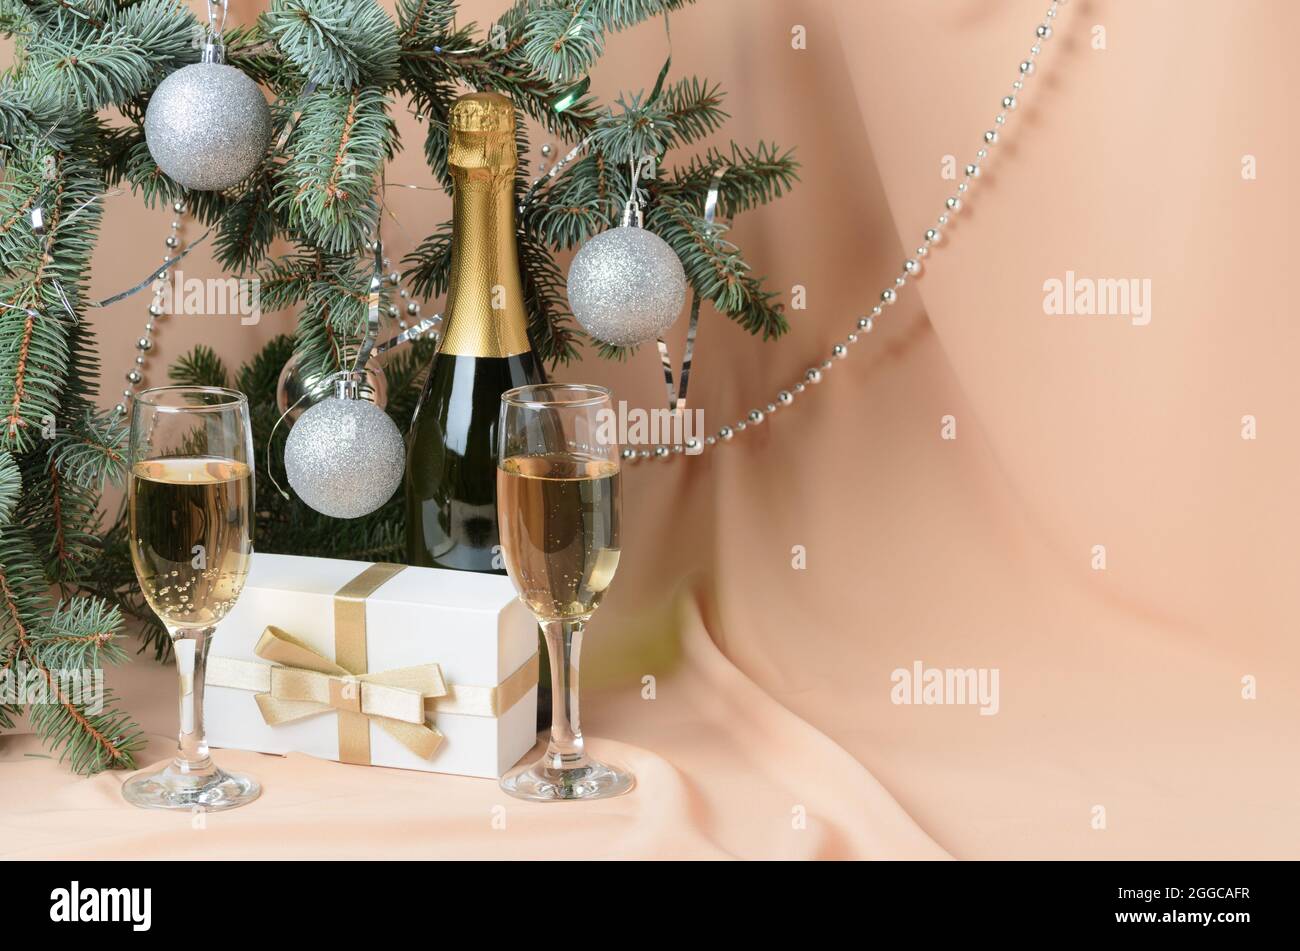 Christmas. A New Year's composition made of branches of a Christmas tree decorated with silver balls, a gift box, sparkling wine glasses on a backgrou Stock Photo